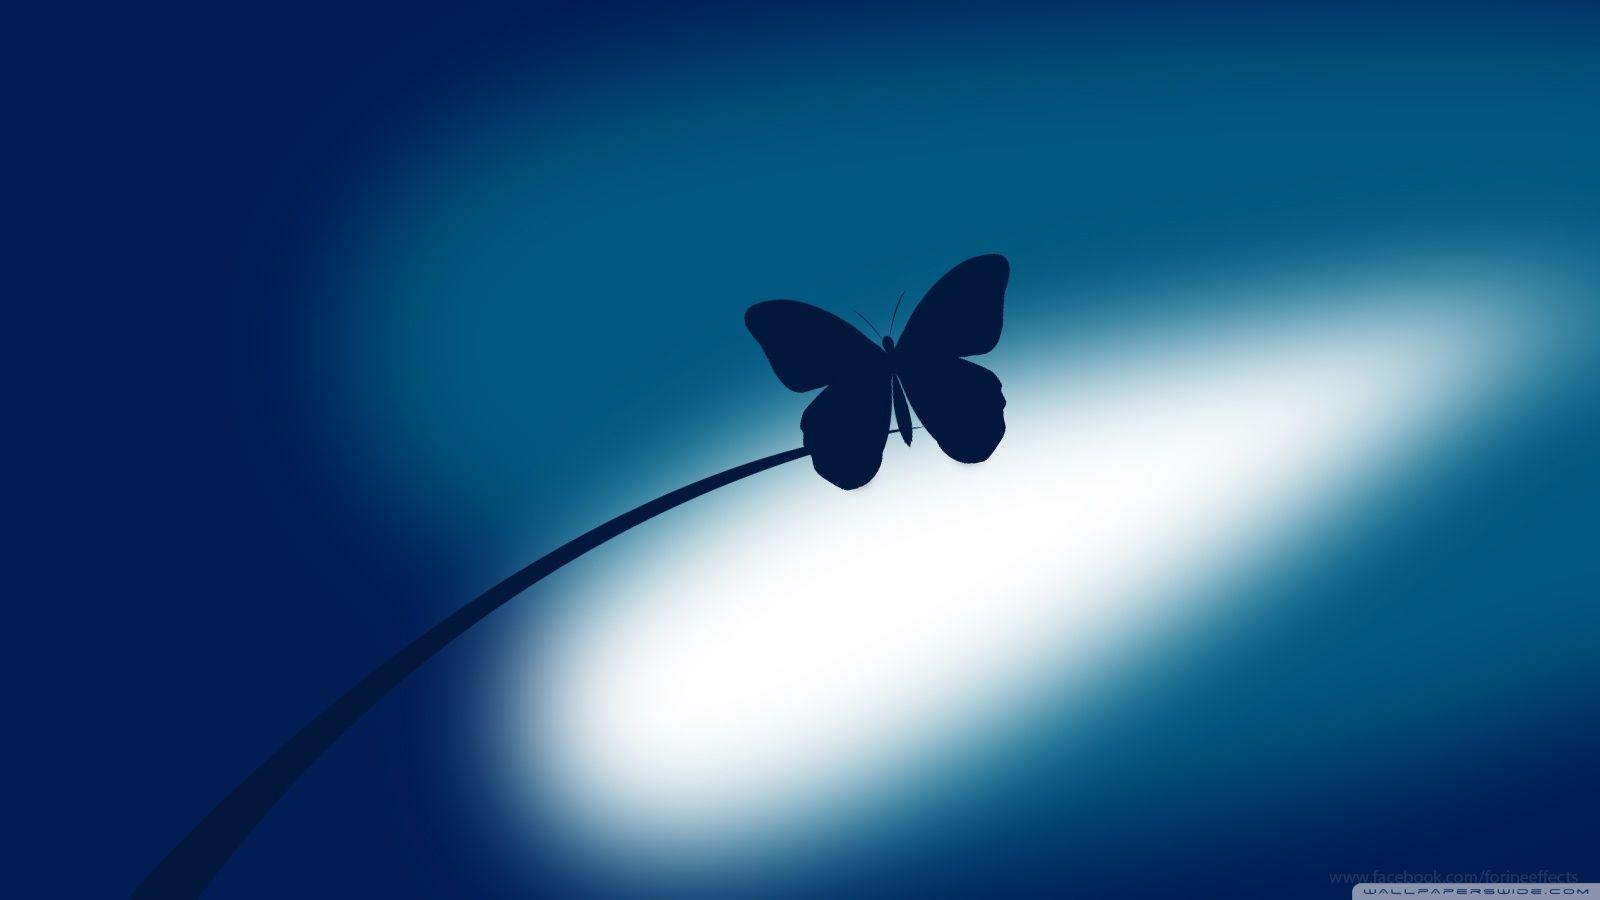 Blue Butterfly Wallpapers - Top Free Blue Butterfly Backgrounds ...